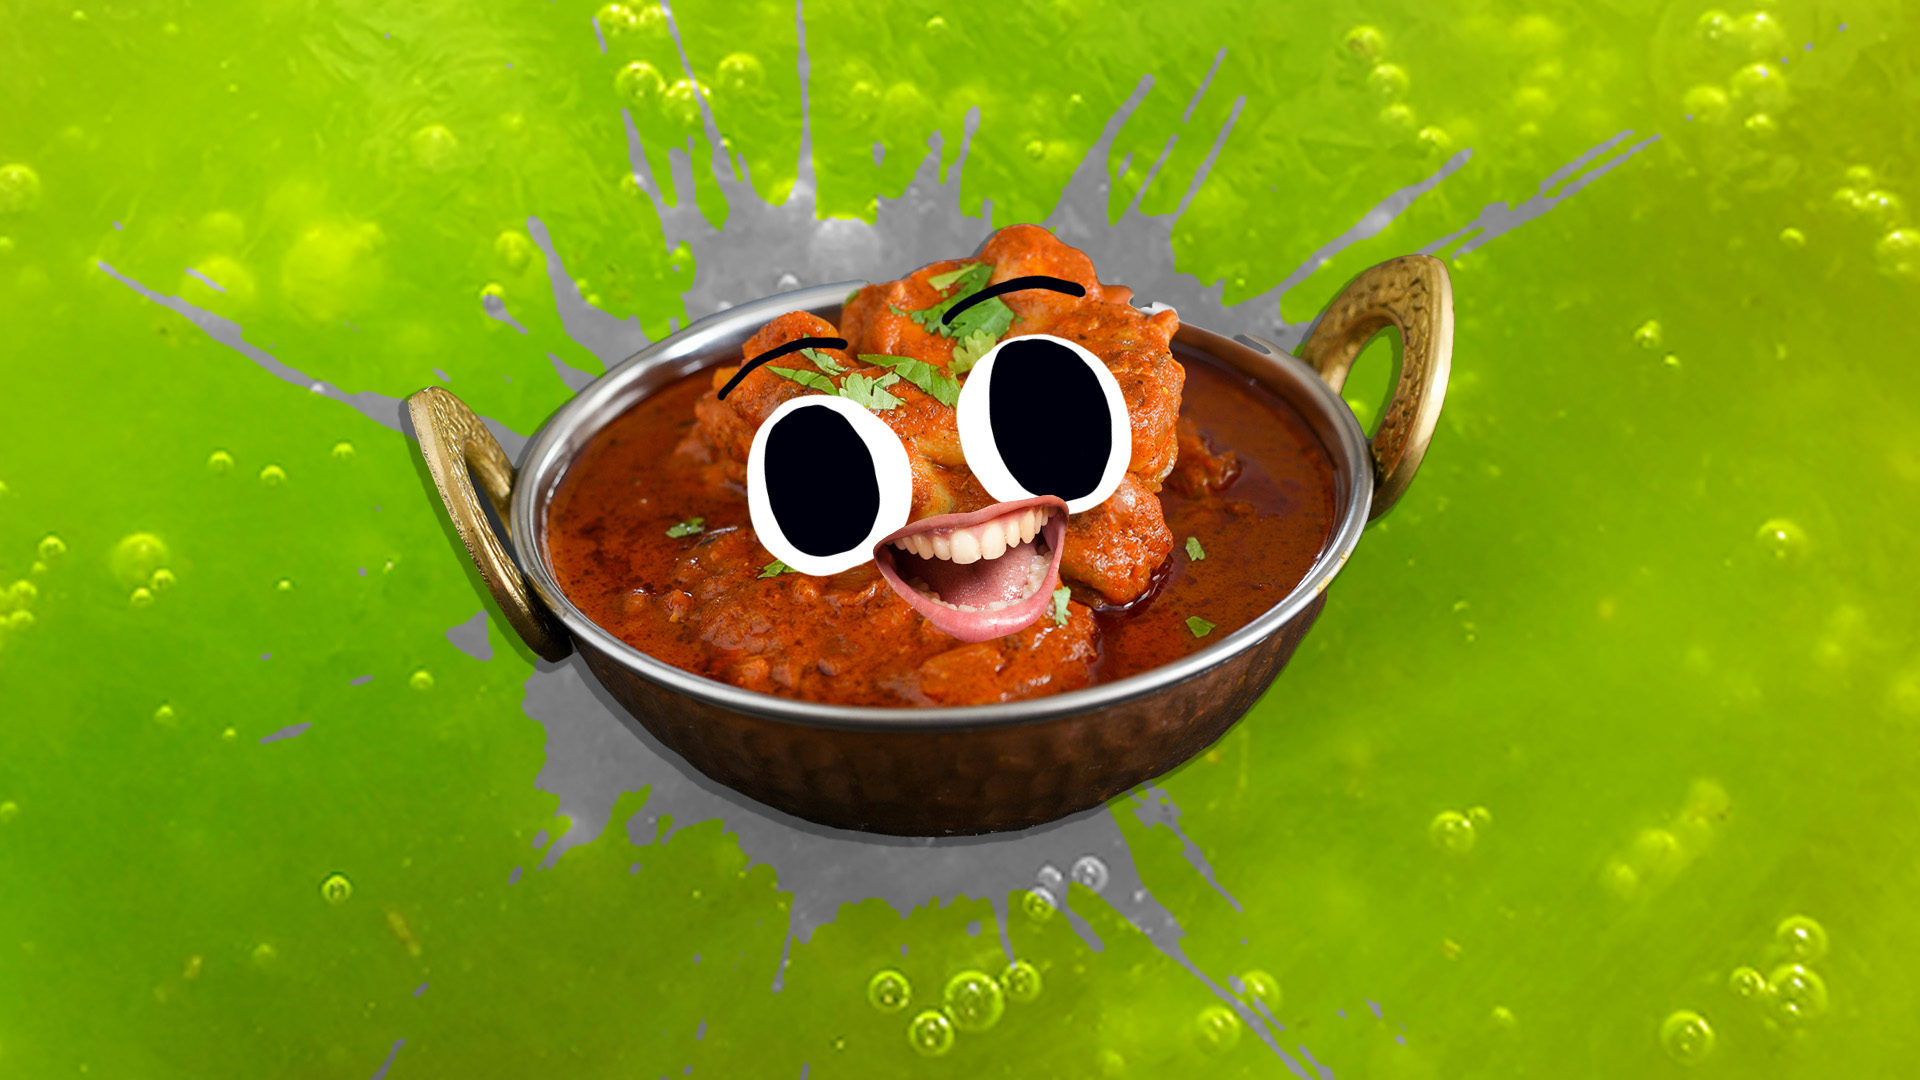 A delicious curry smiling at you